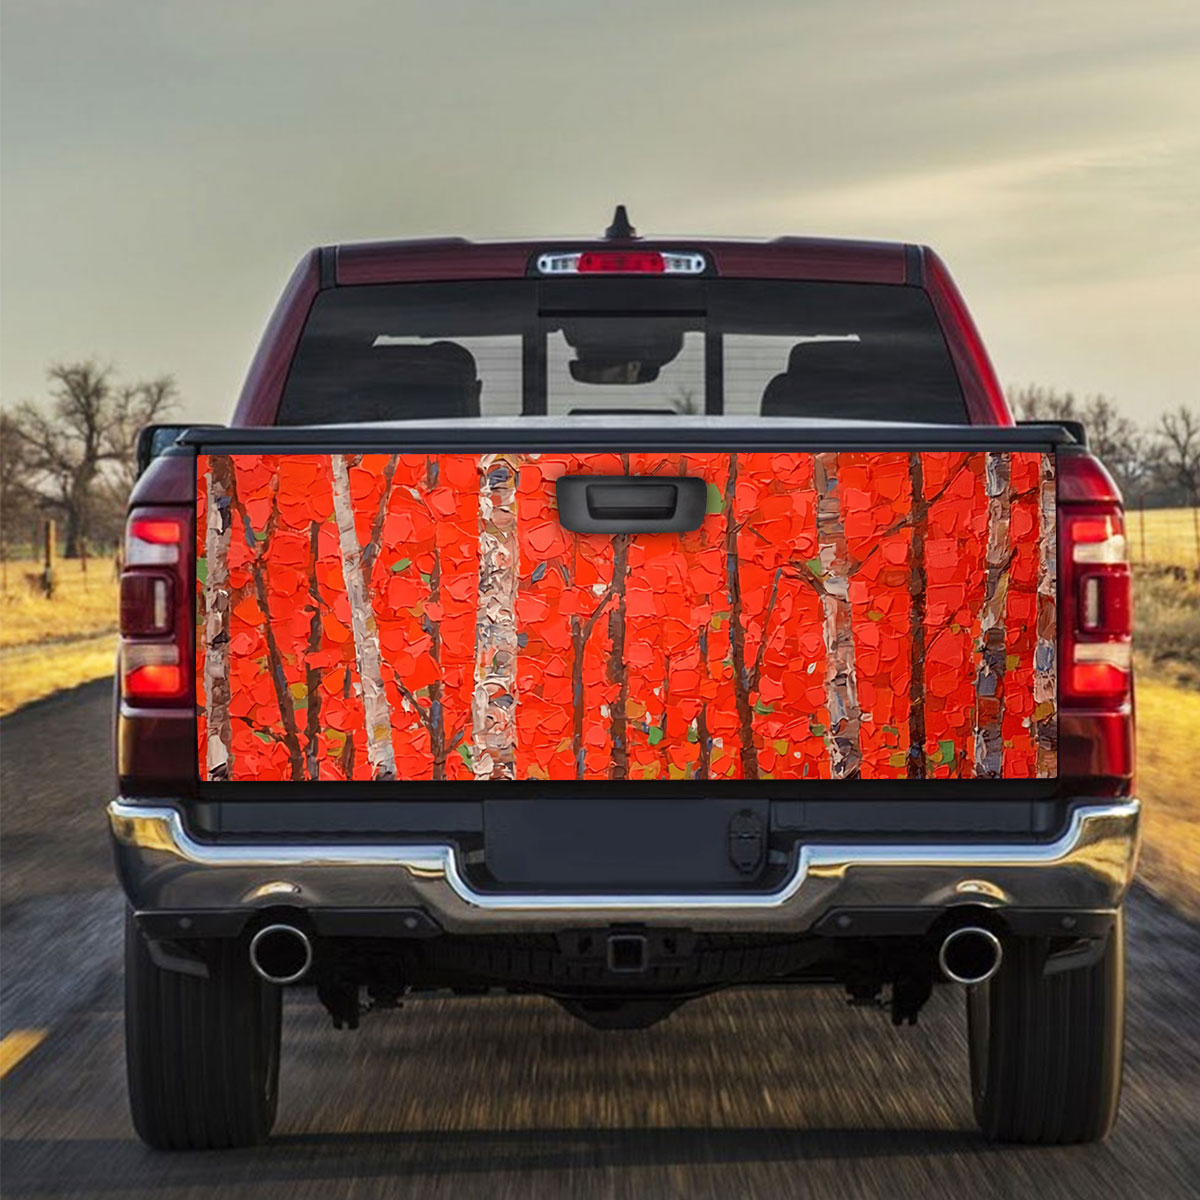 Nighttime Birch Trees Truck Bed Decal